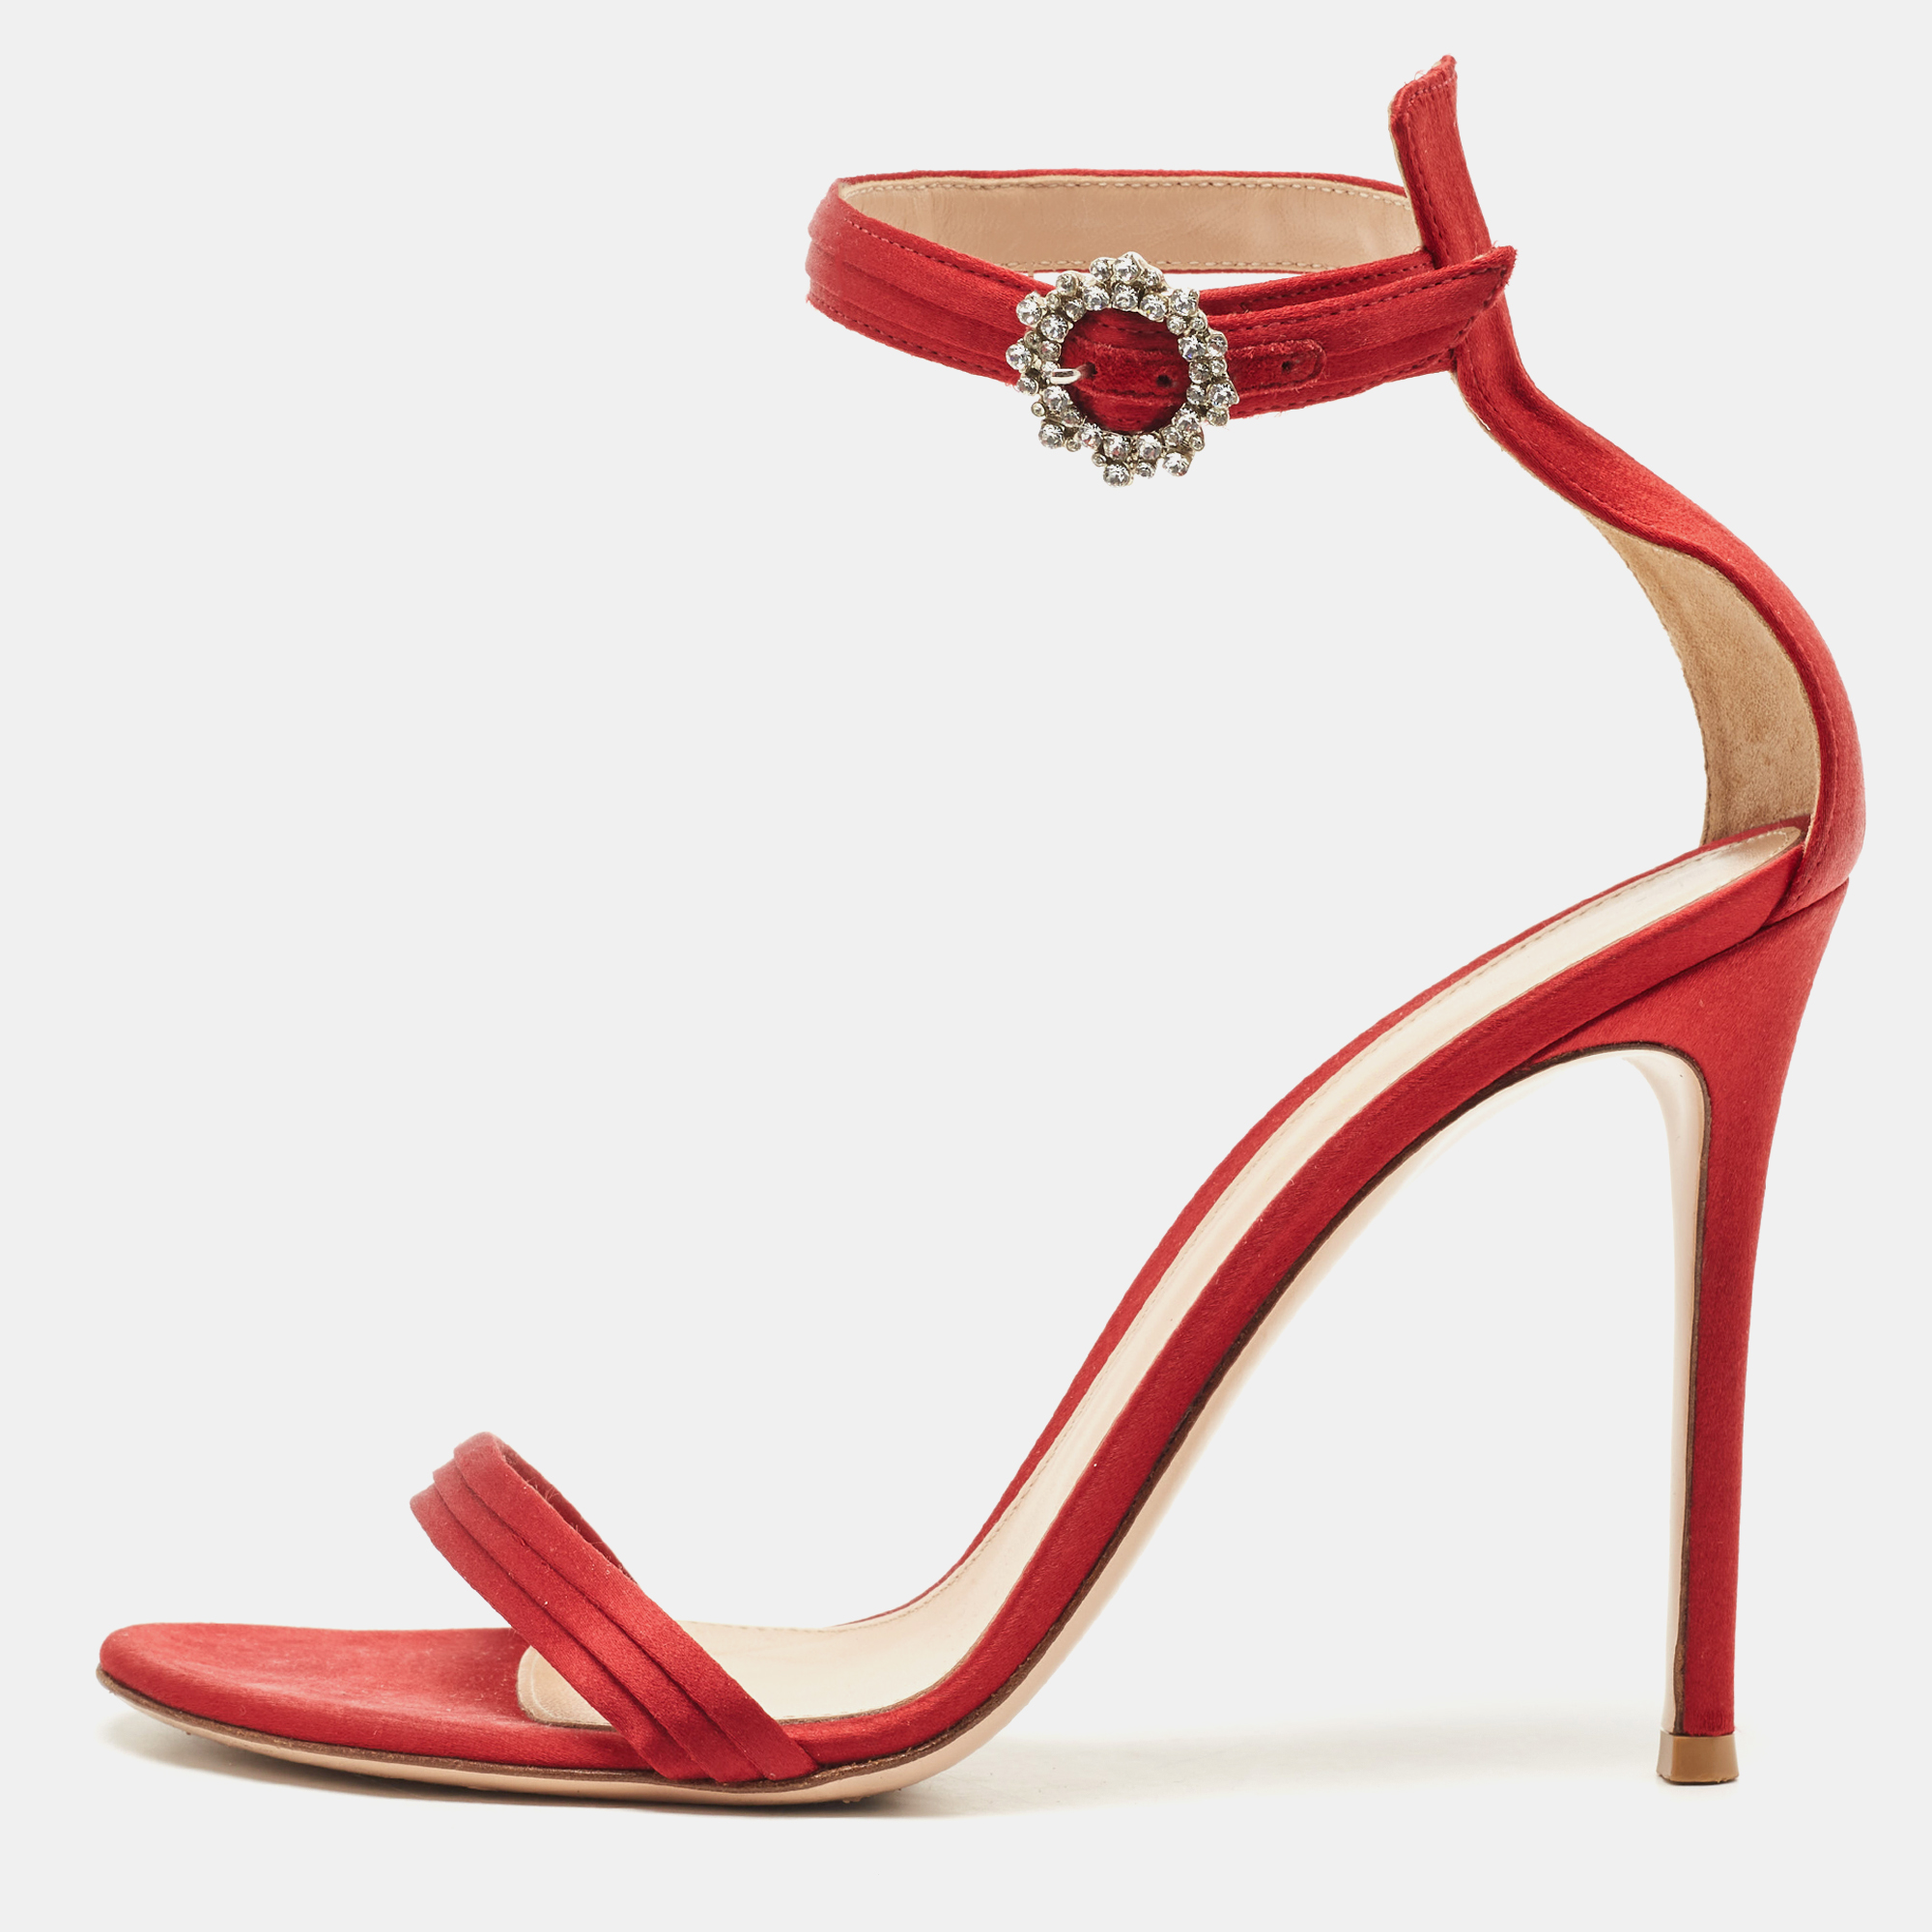 Gianvito Rossi Red Satin Ankle Strap Sandals Size 40